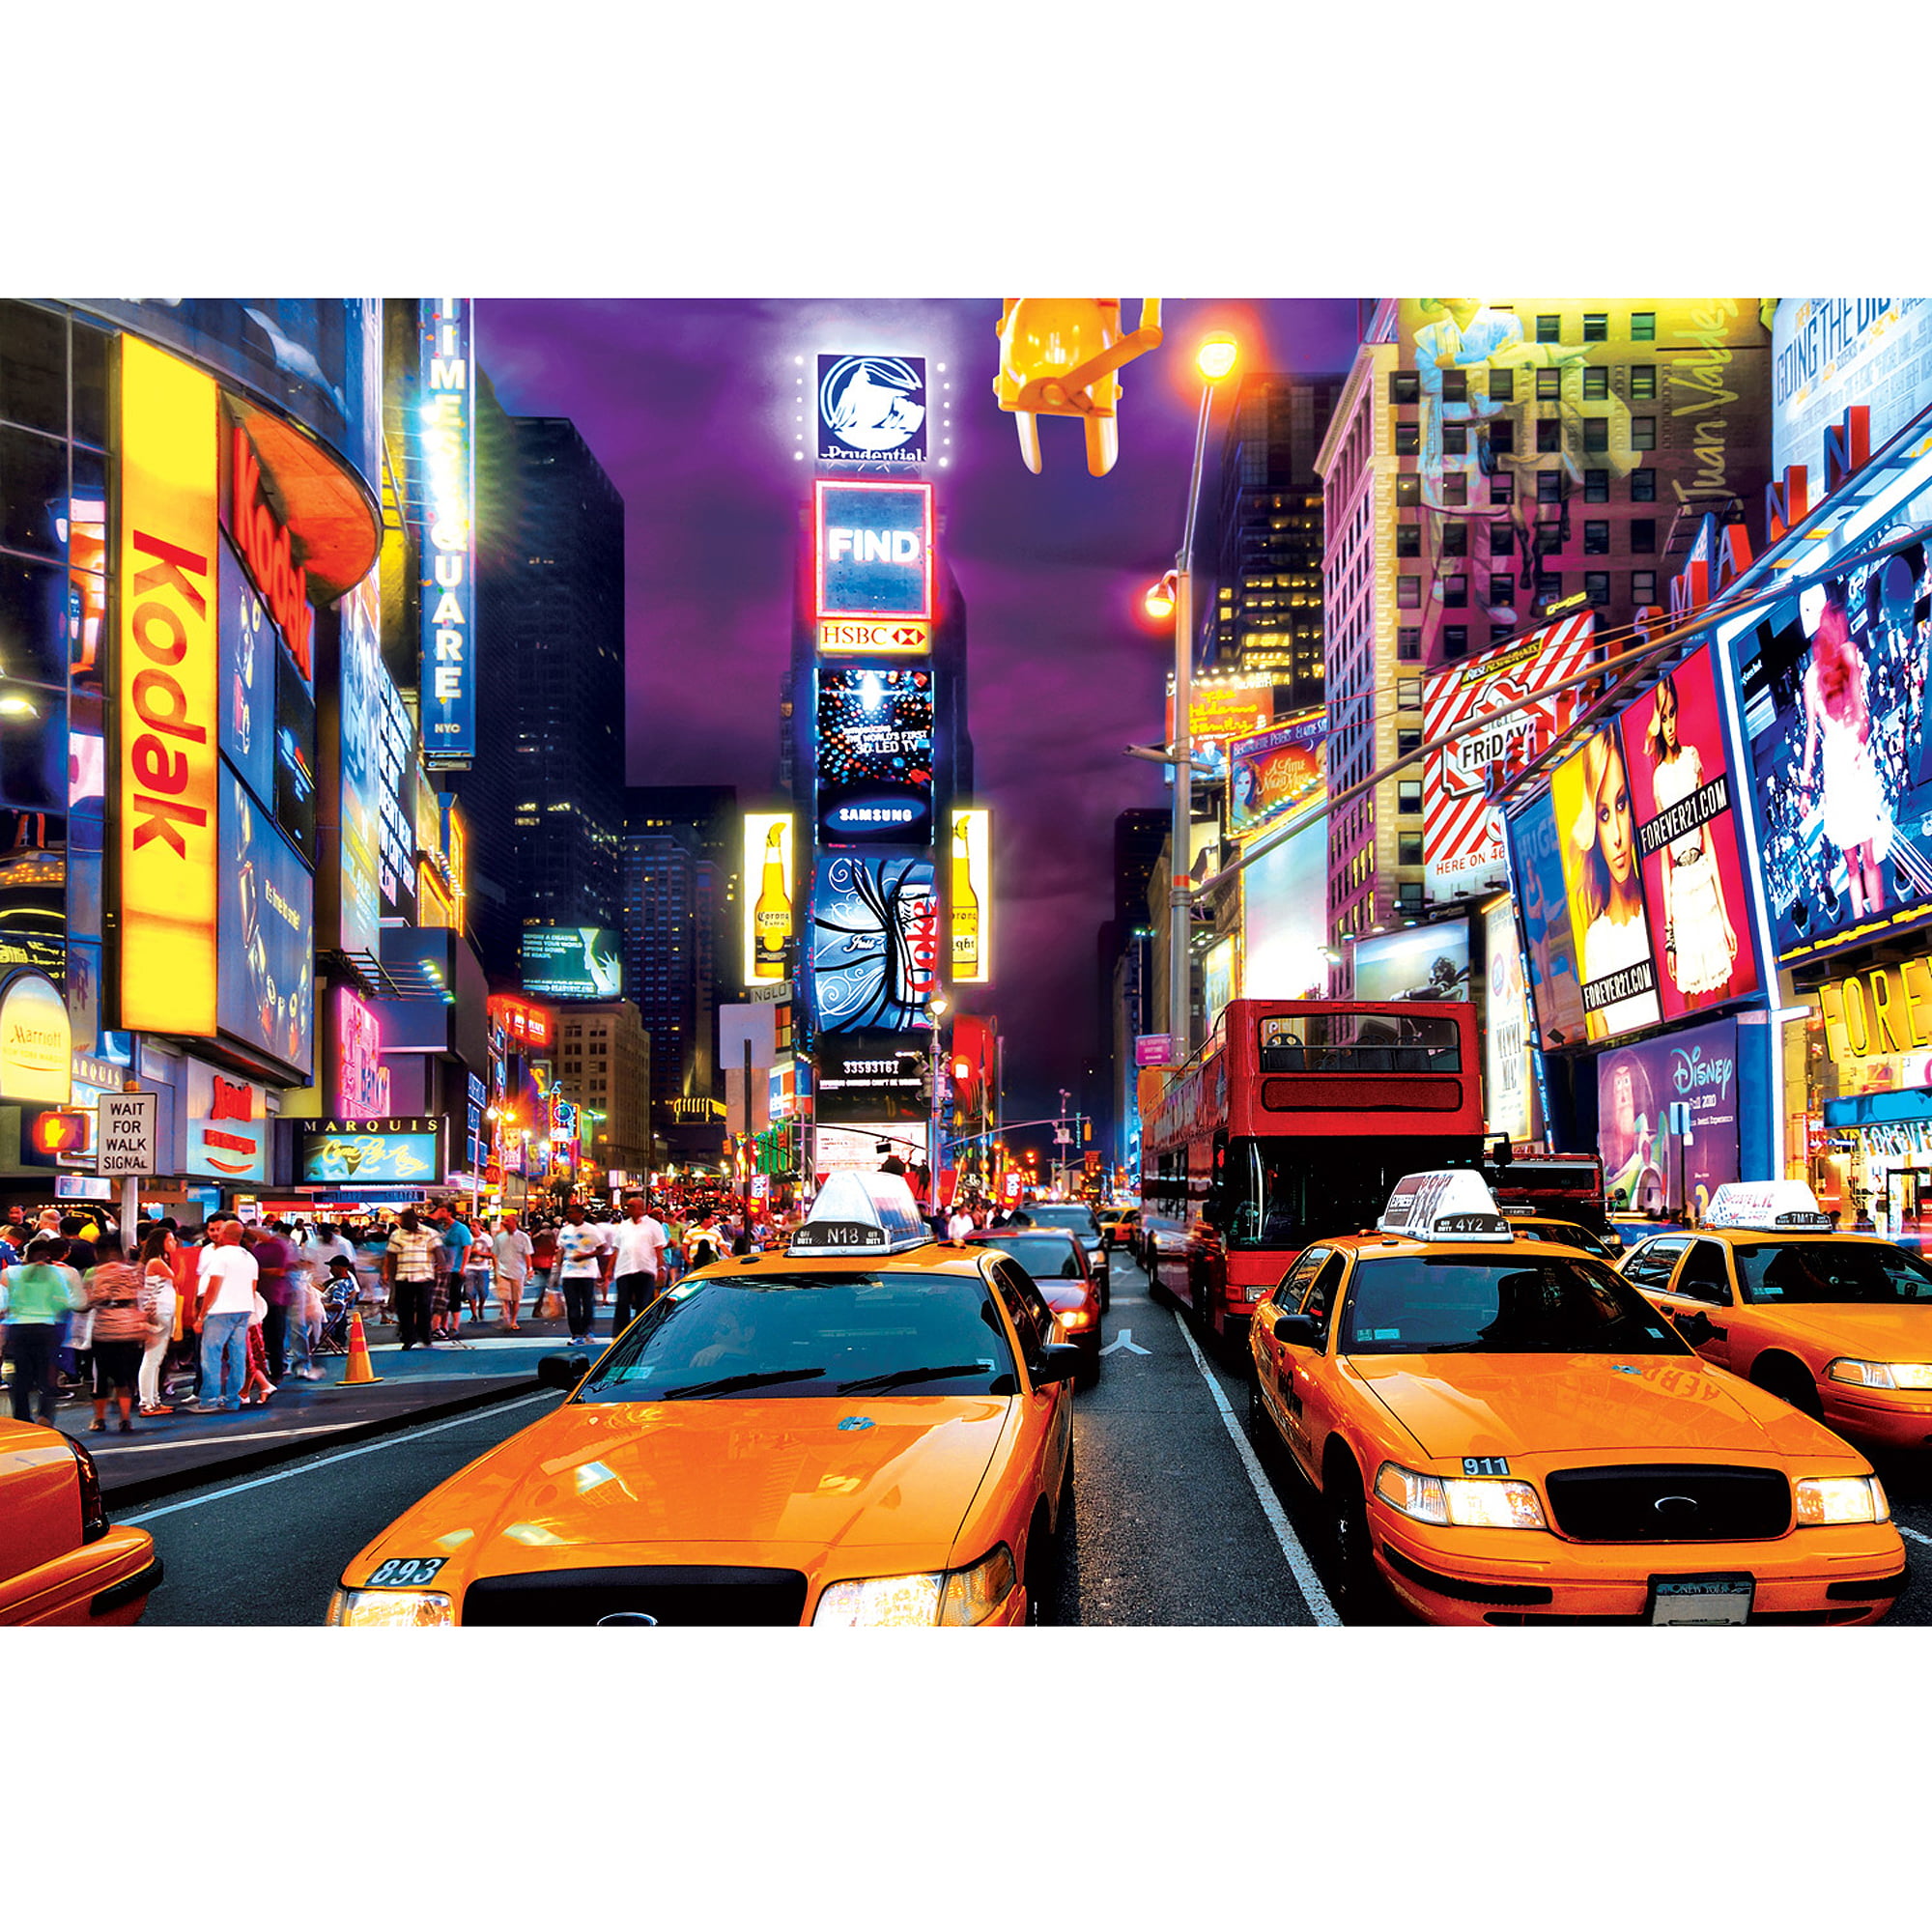 Buffalo Games Large Pieces Times Square Jigsaw Puzzle, 1,000 Pieces ...